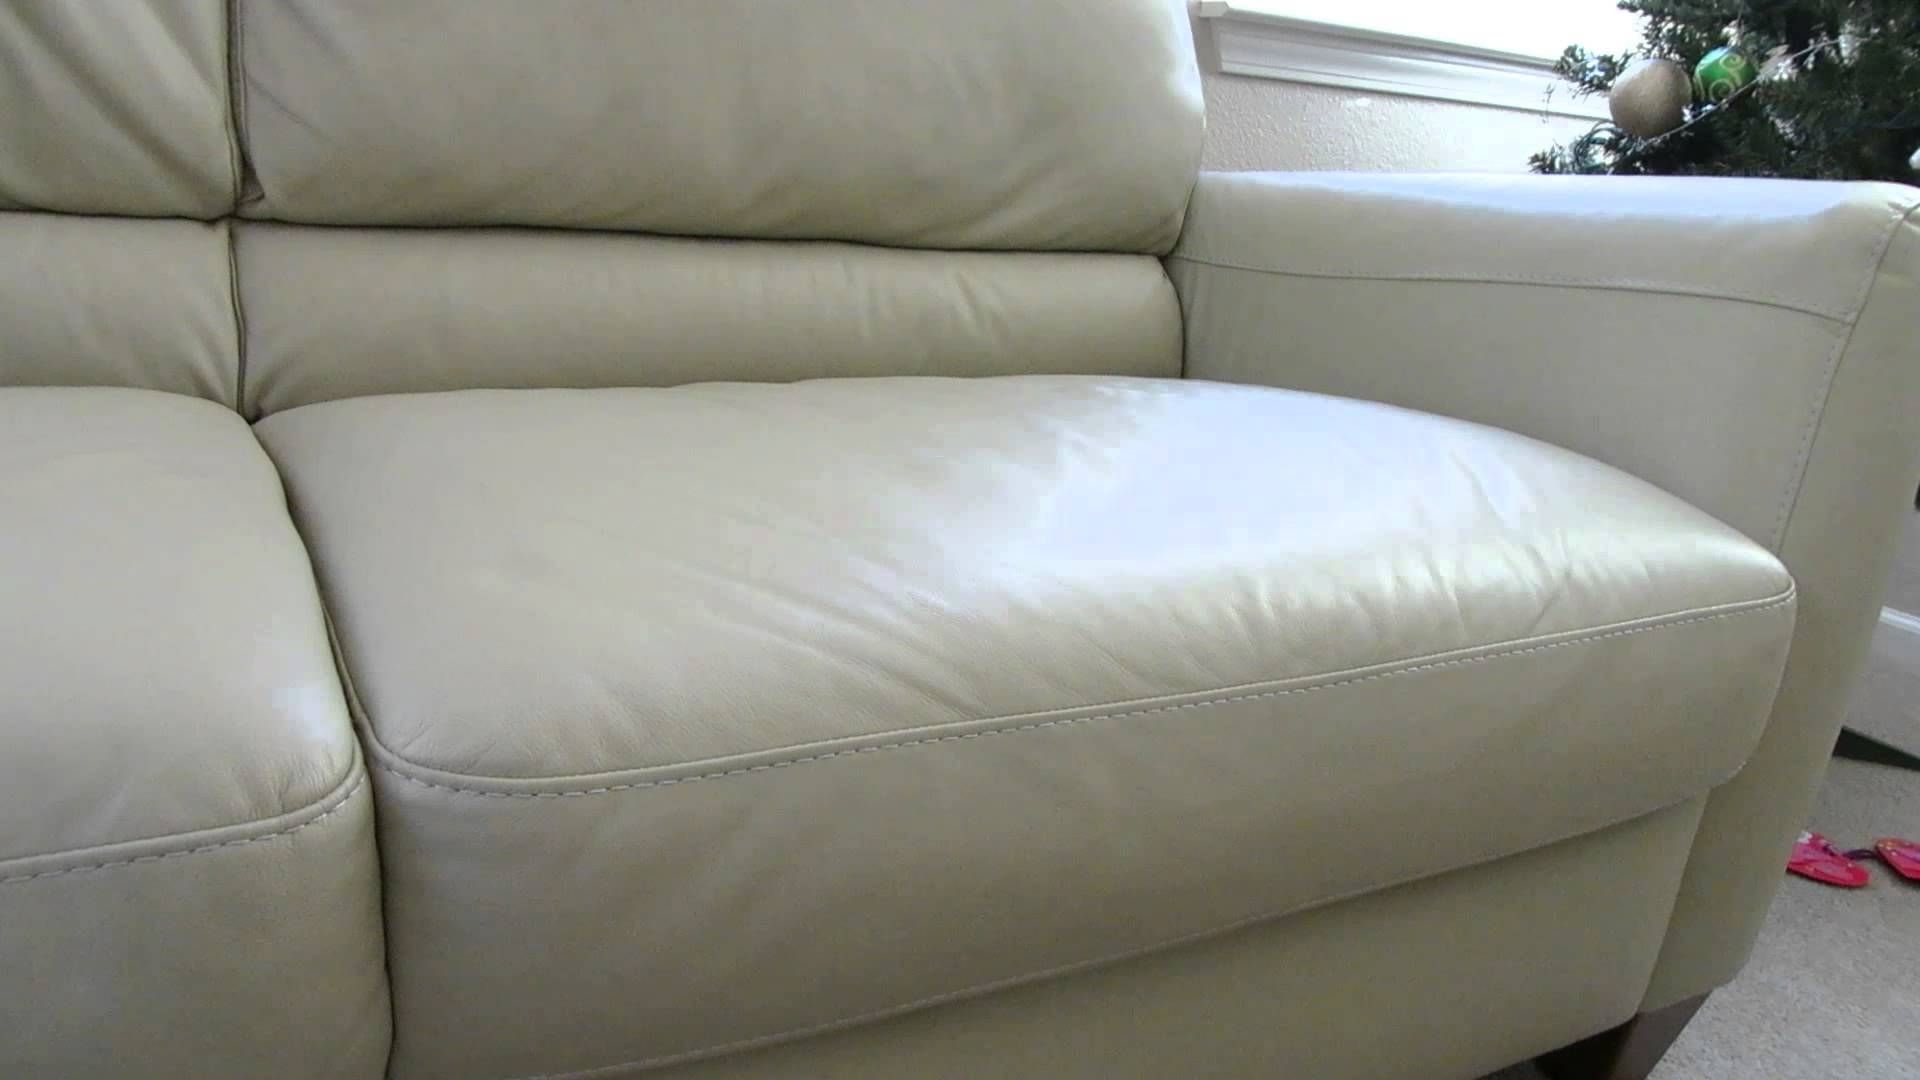 Most Current Review Of The Macys Almafi Leather Lime Green Sofa – Youtube With Macys Leather Sofas (View 14 of 15)